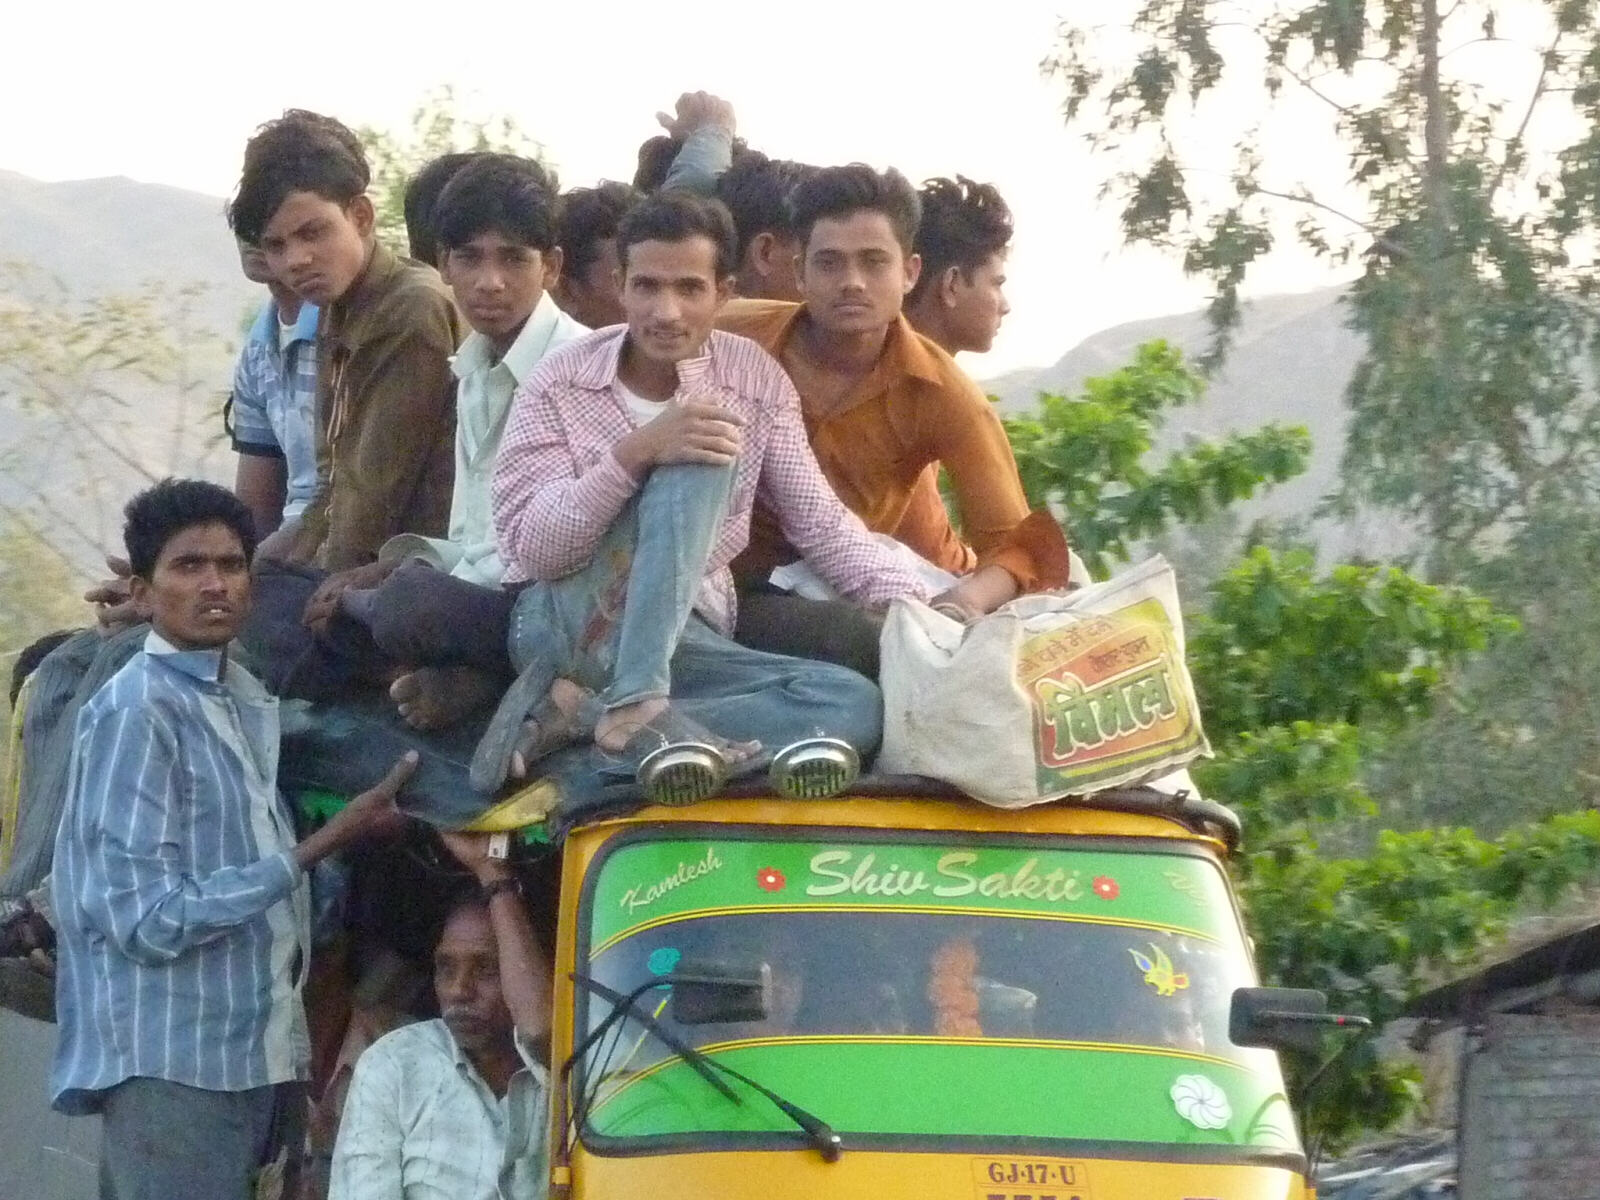 A rather crowded autorickshaw in Champaner, India